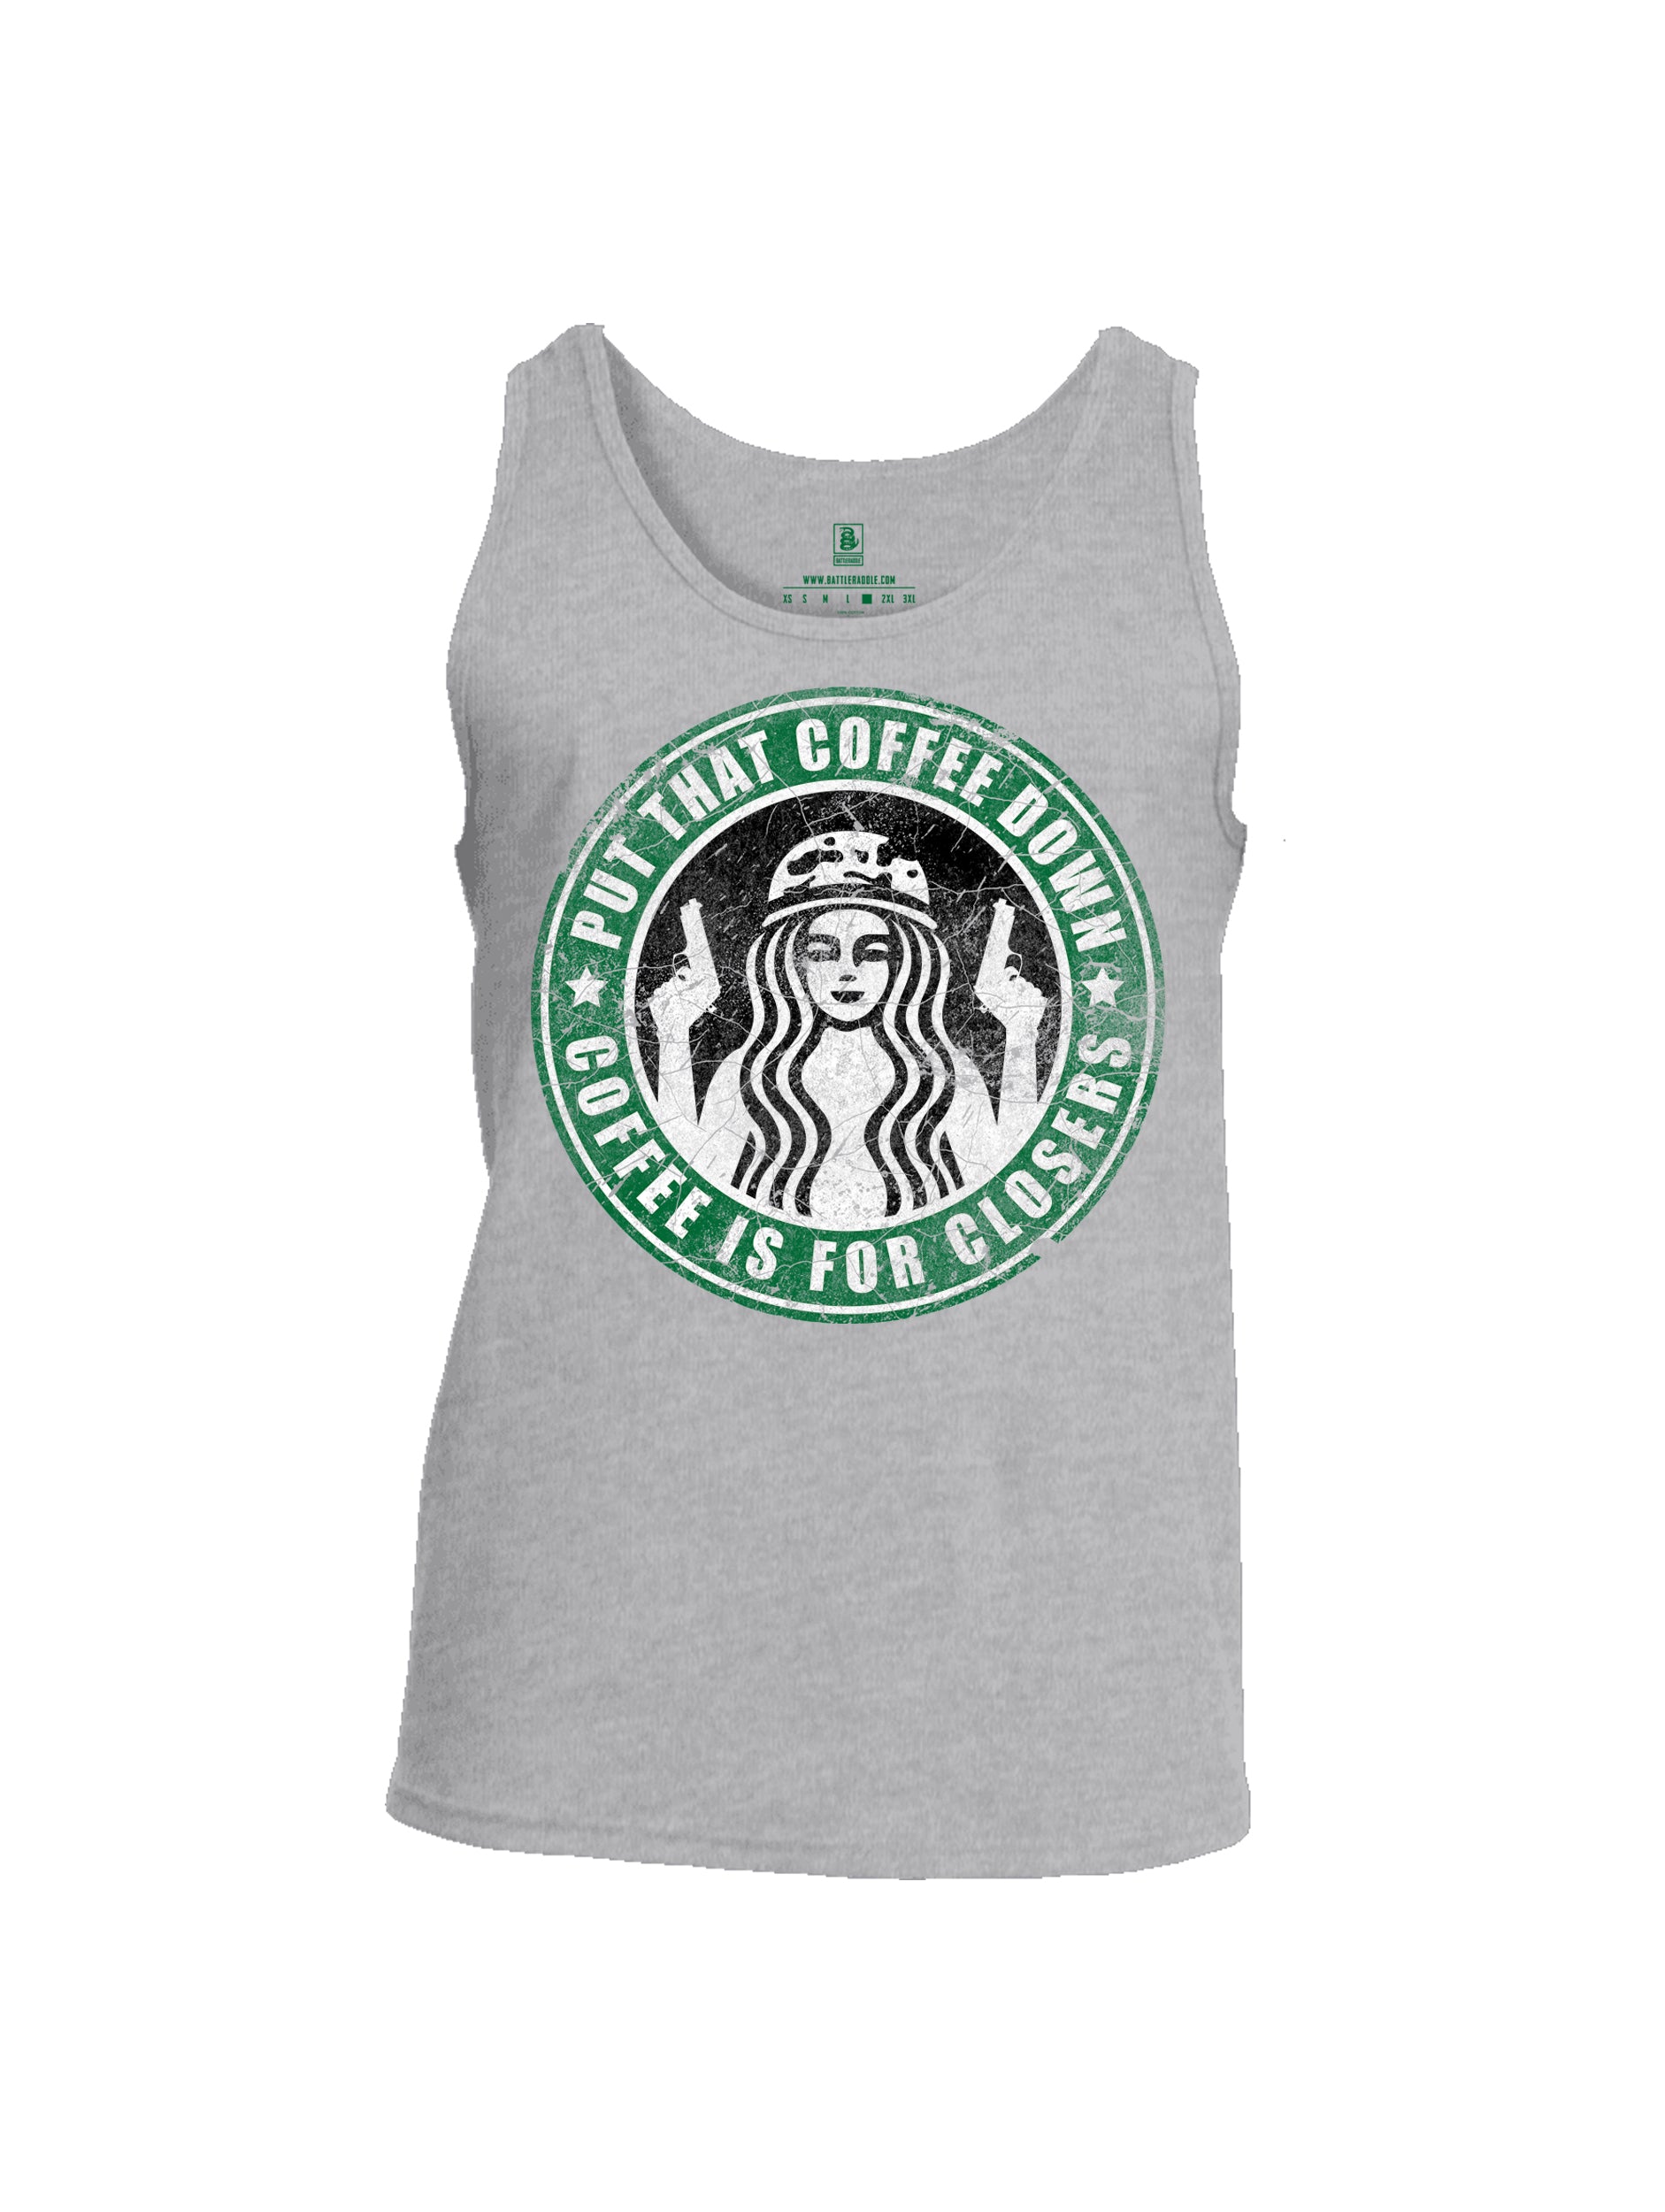 Battleraddle Put That Coffee Down Coffee Is For Closers Mens Cotton Tank Top